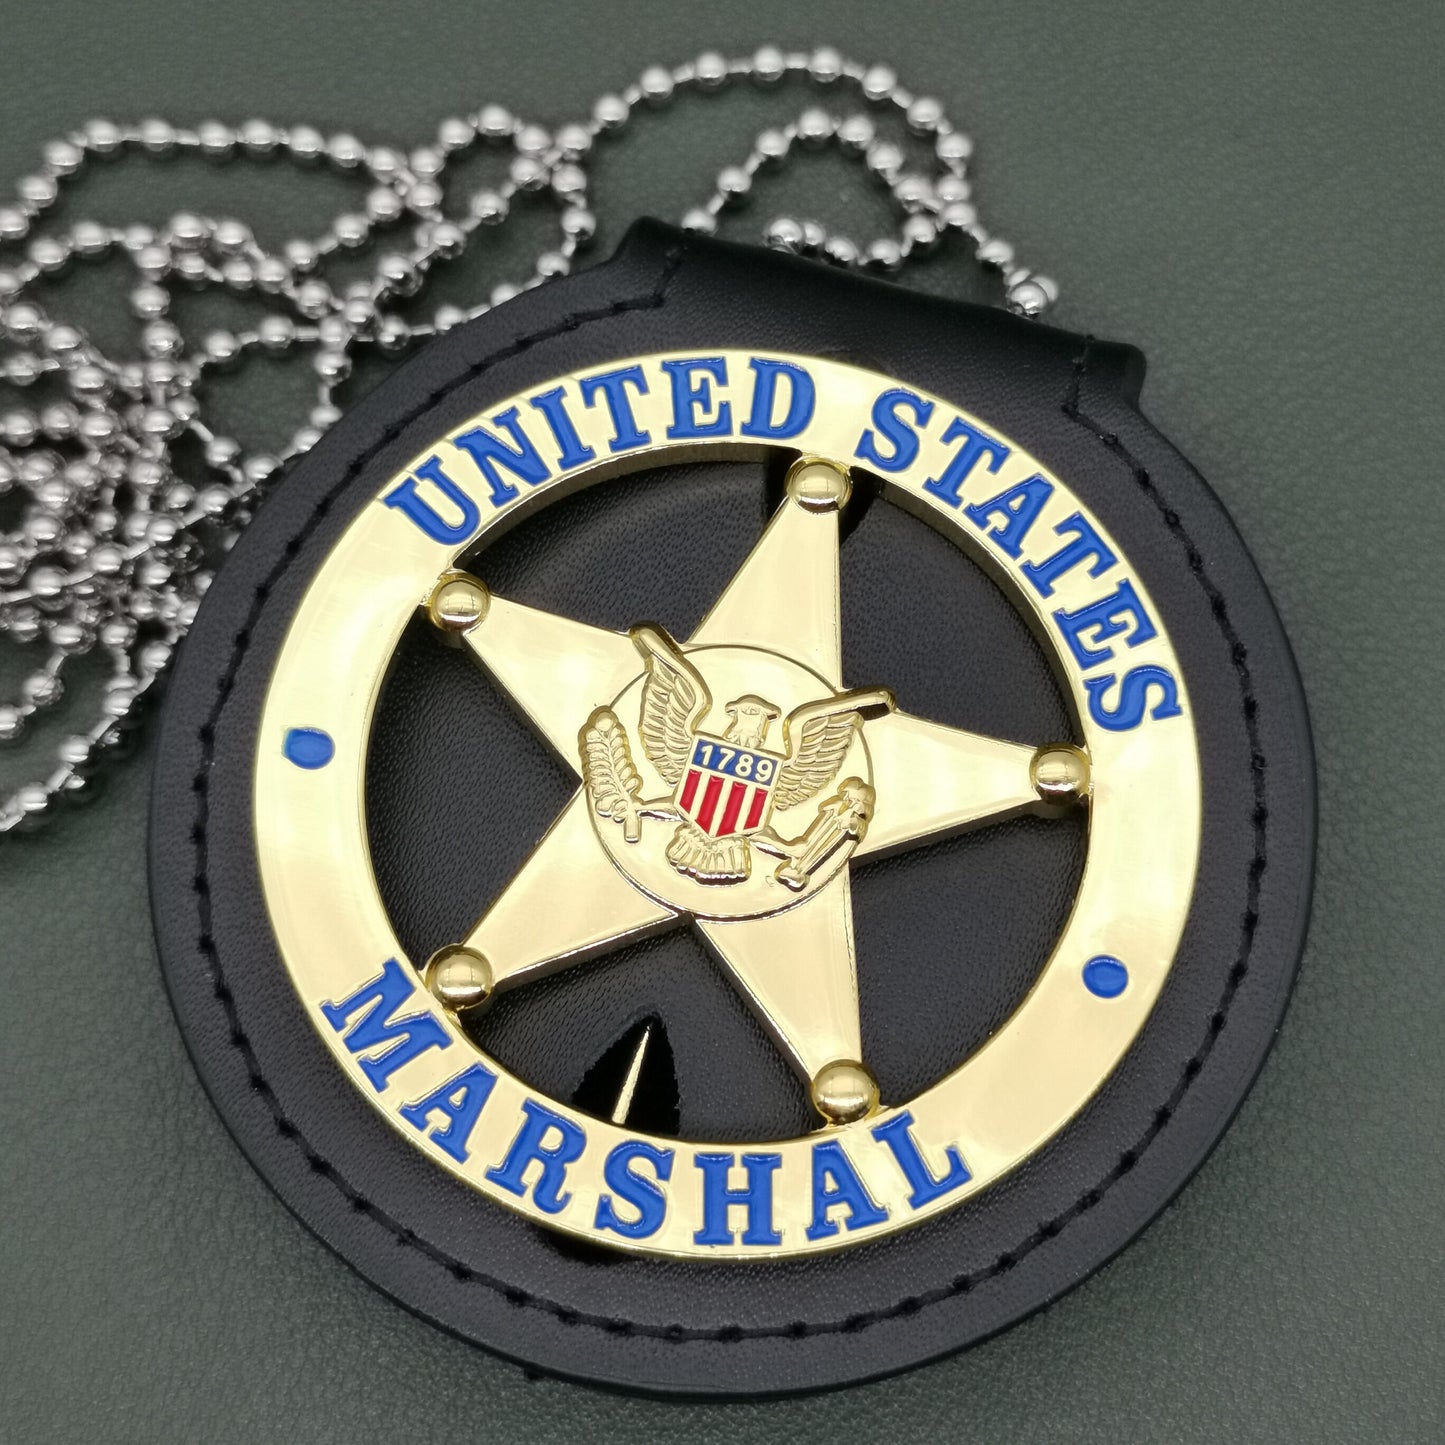 U.S. MARSHAL Federal Court enforcement Special Agent Badge  Halloween Gift Cosplay Detective Movie Prop 1:1